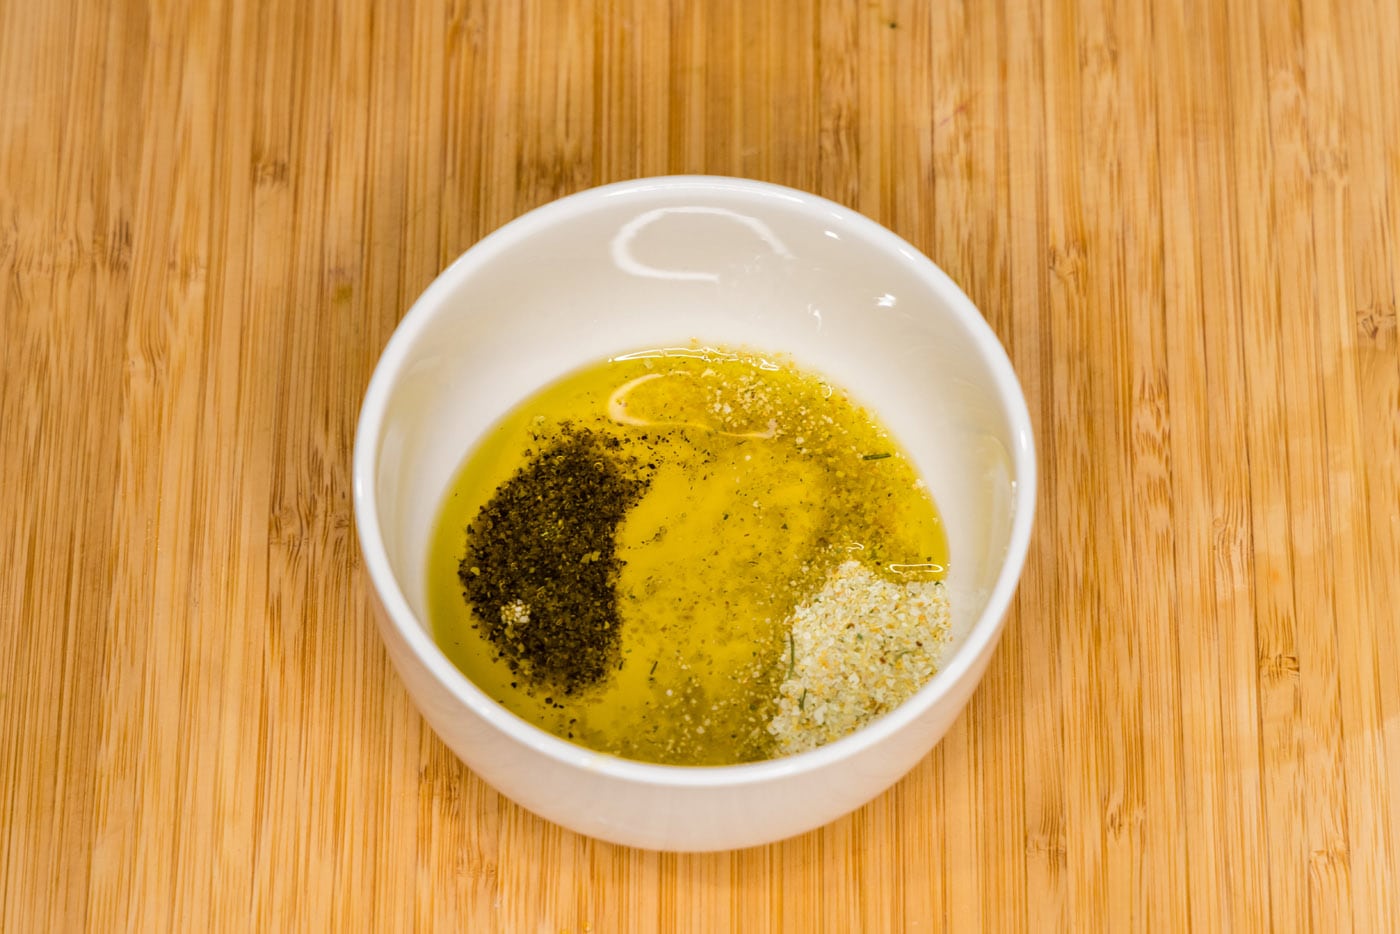 salt, pepper, and olive oil in a bowl